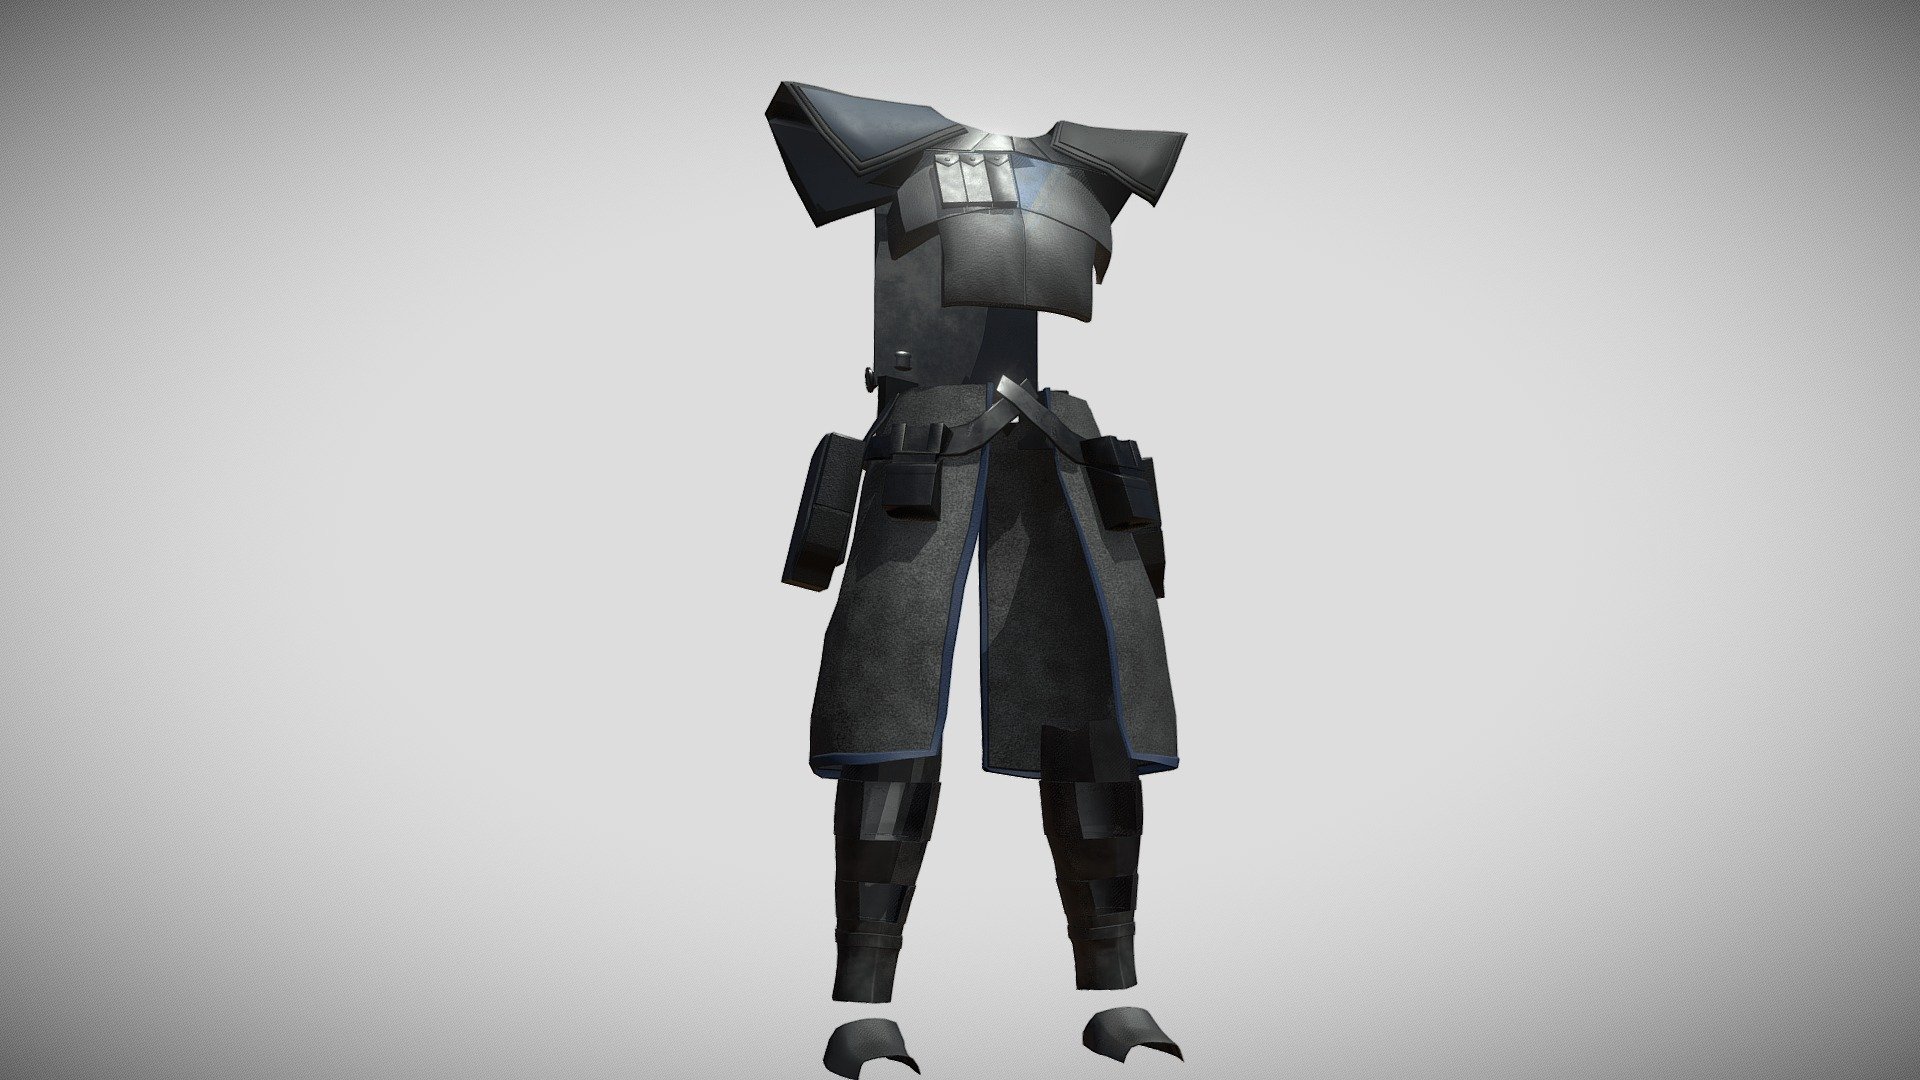 Armor worn by Arc Clone Troopers in star wars the clone wars. Made in Blender 2.93. Part of a full set which will soon be uploaded - ARC Trooper Armor - 3D model by JJTale 3d model